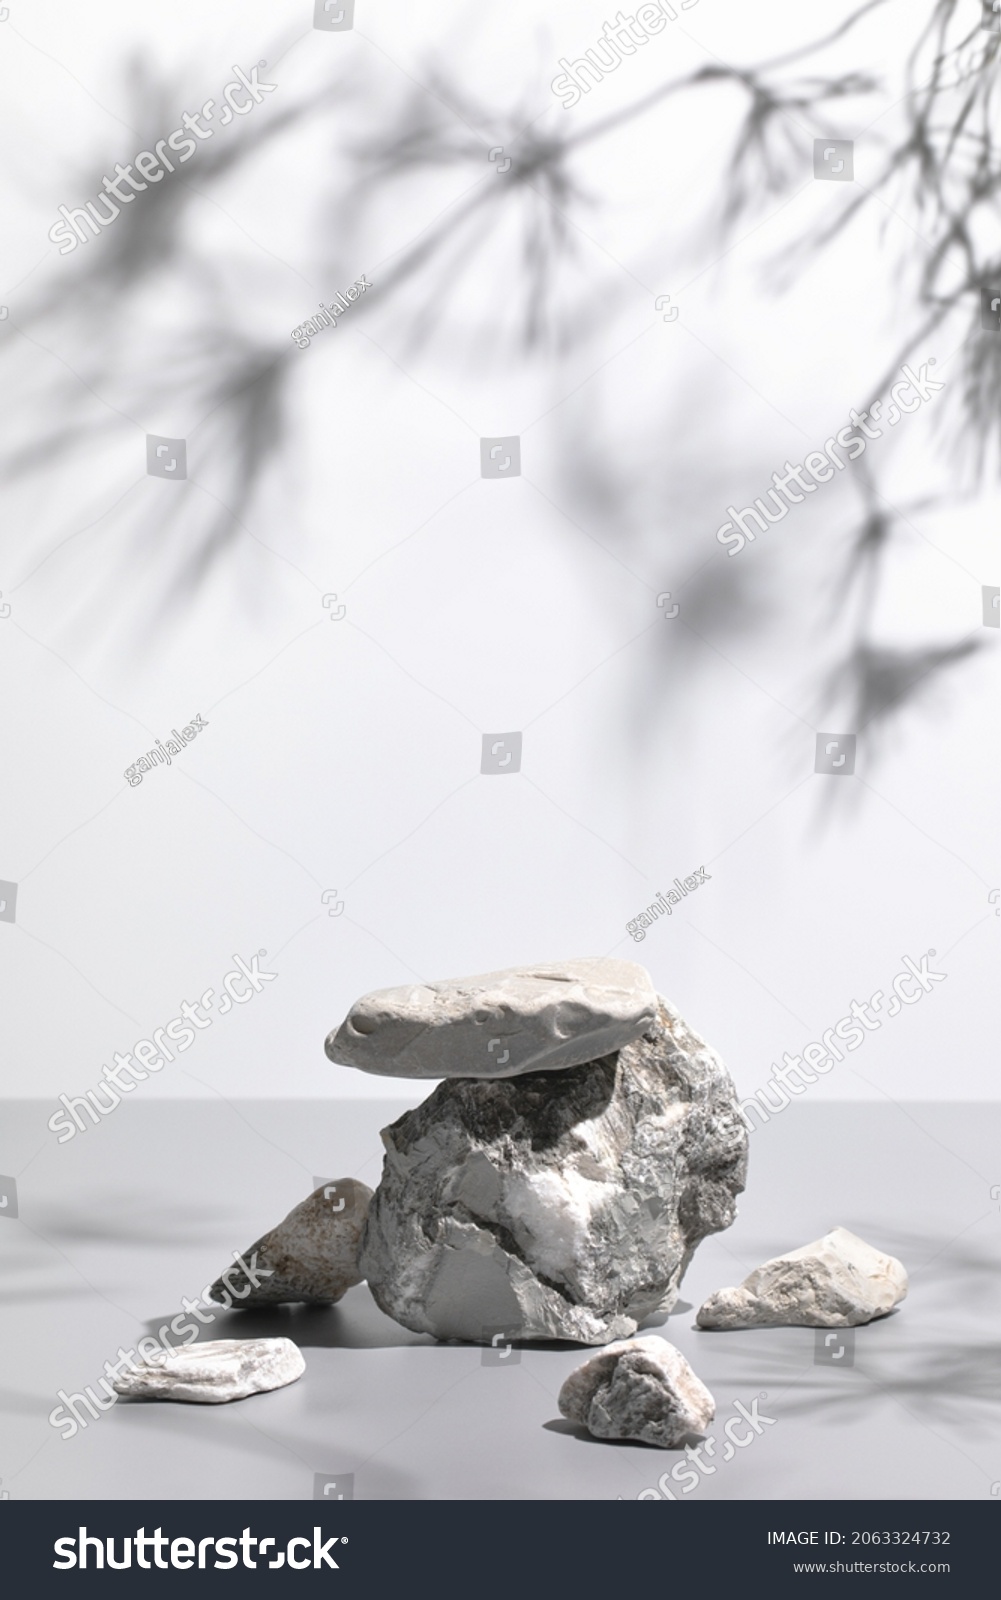 Abstract nature scene with composition of gray stones and pine tree leaves shadows. Neutral background with podium for cosmetic or beauty product, branding, packaging mockups. Copy space, front view #2063324732